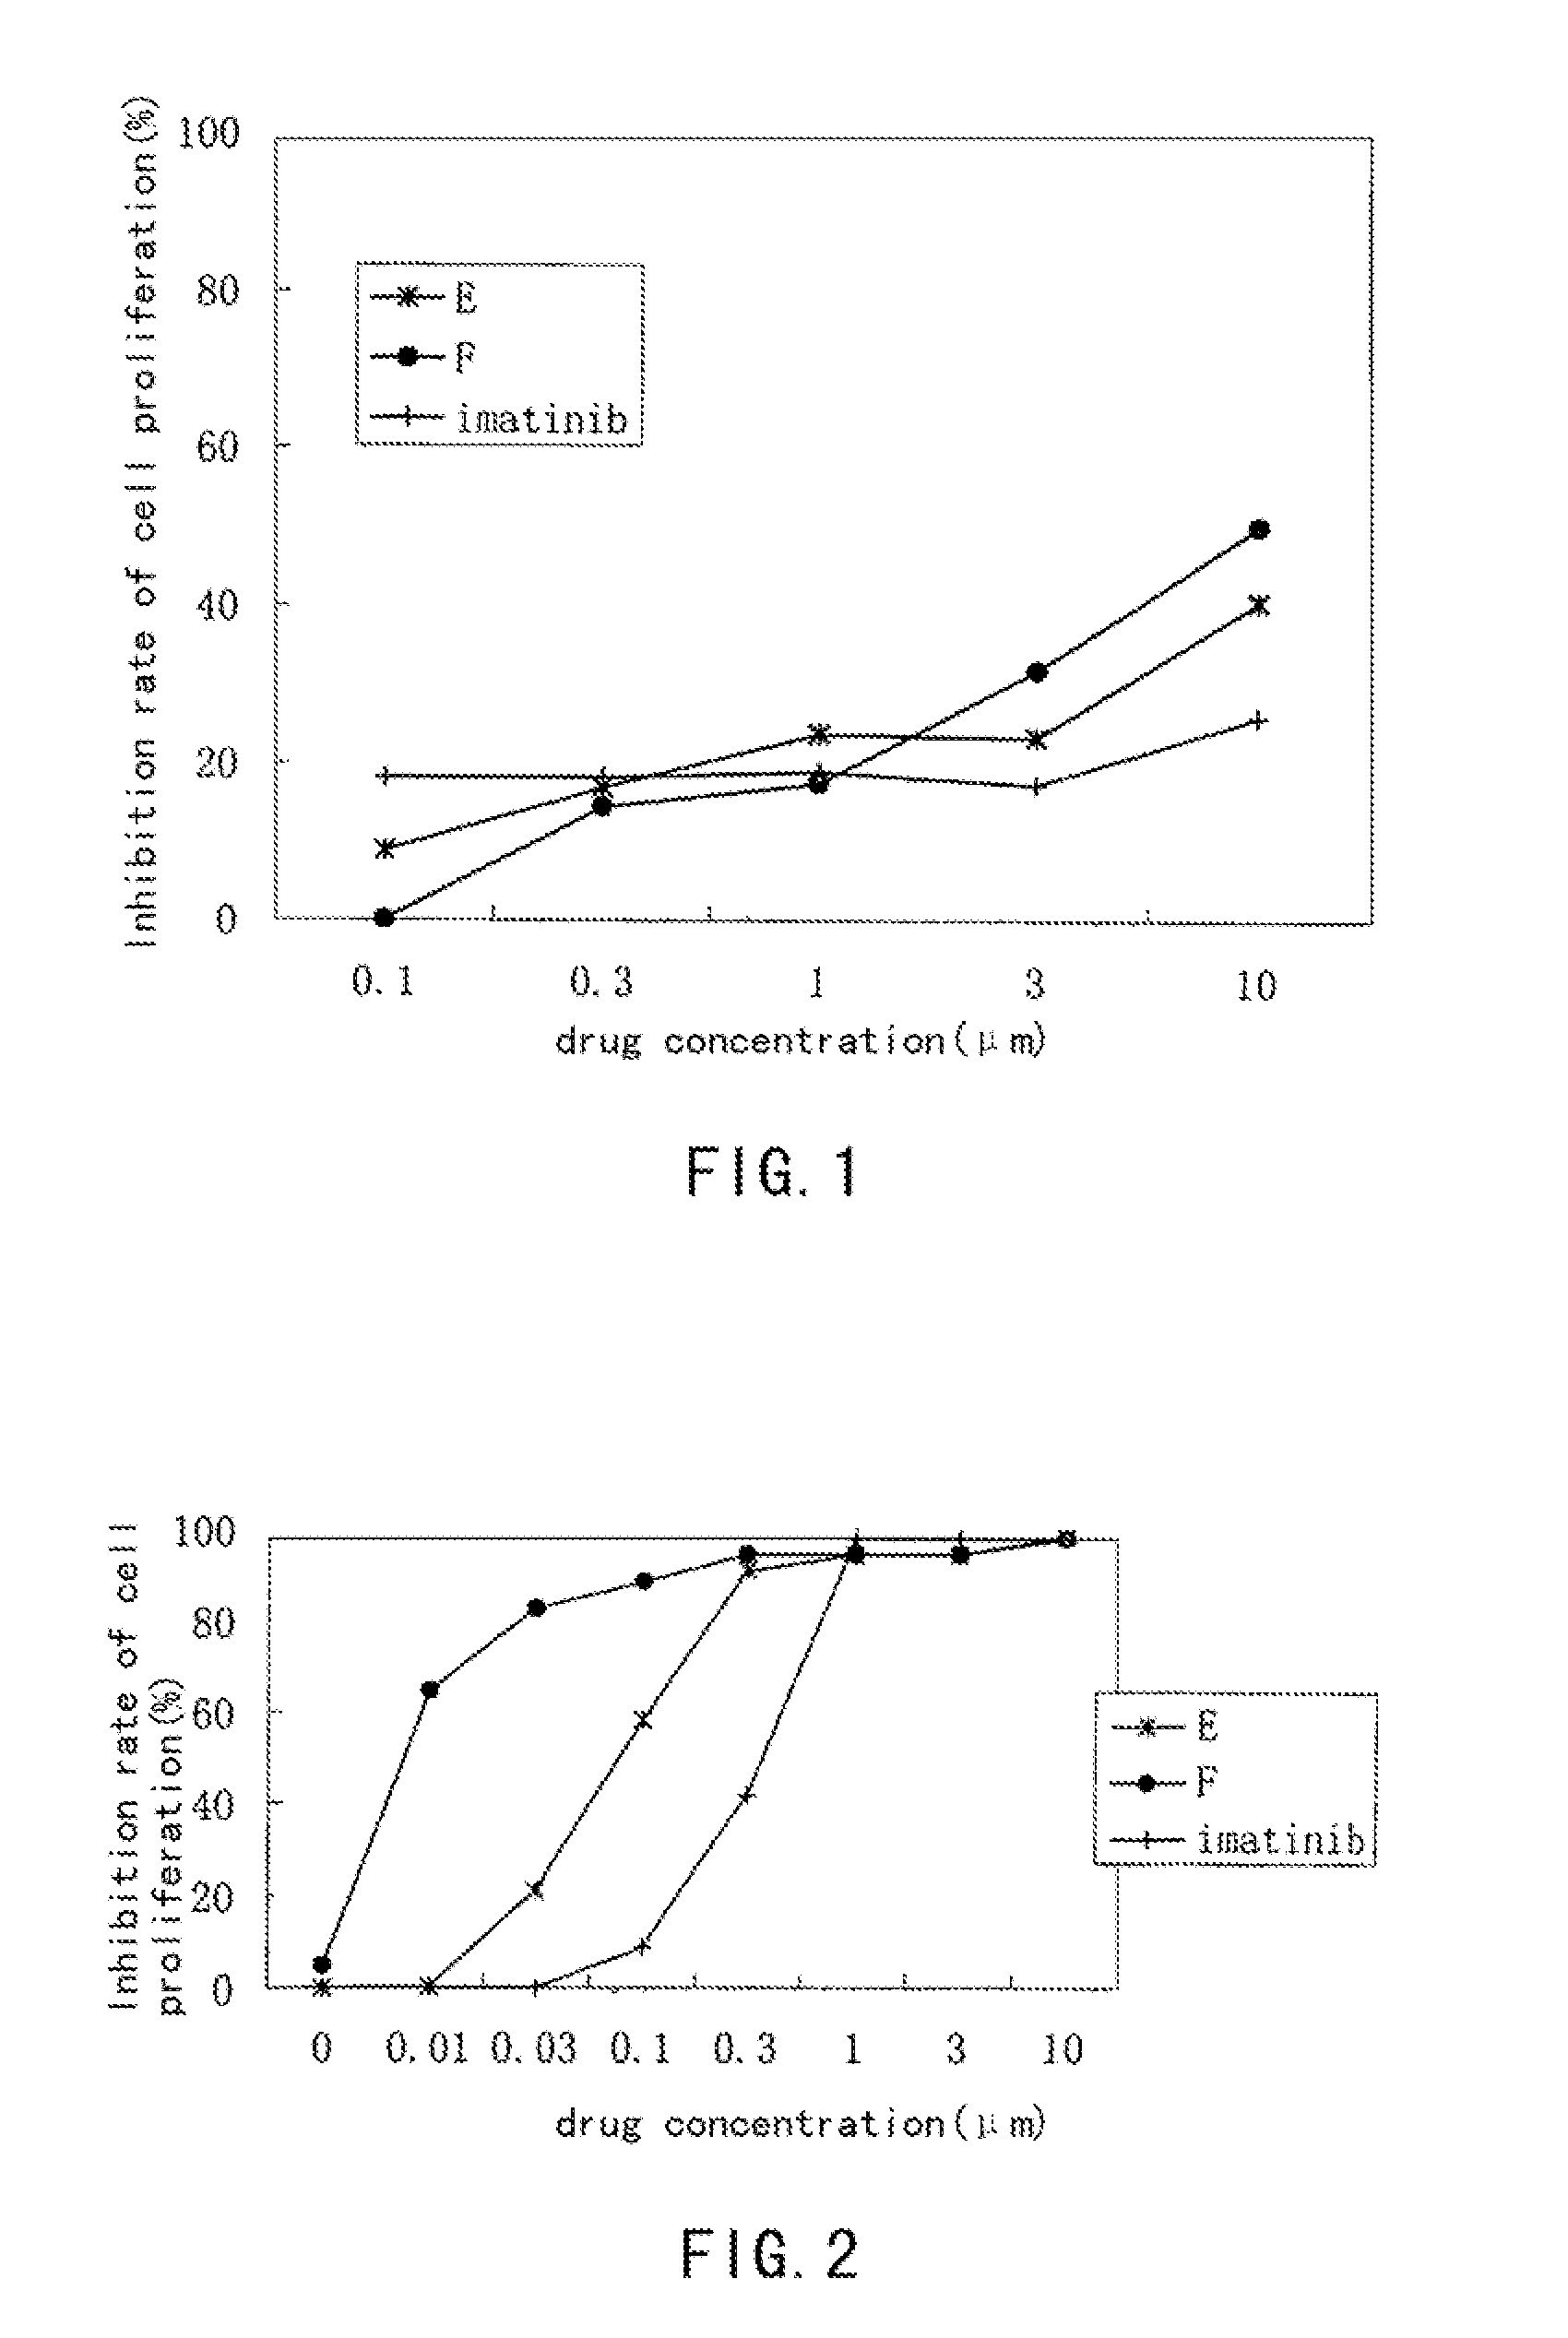 Aminopyrimidine compounds and their salts, process for preparation and pharmaceutical use thereof